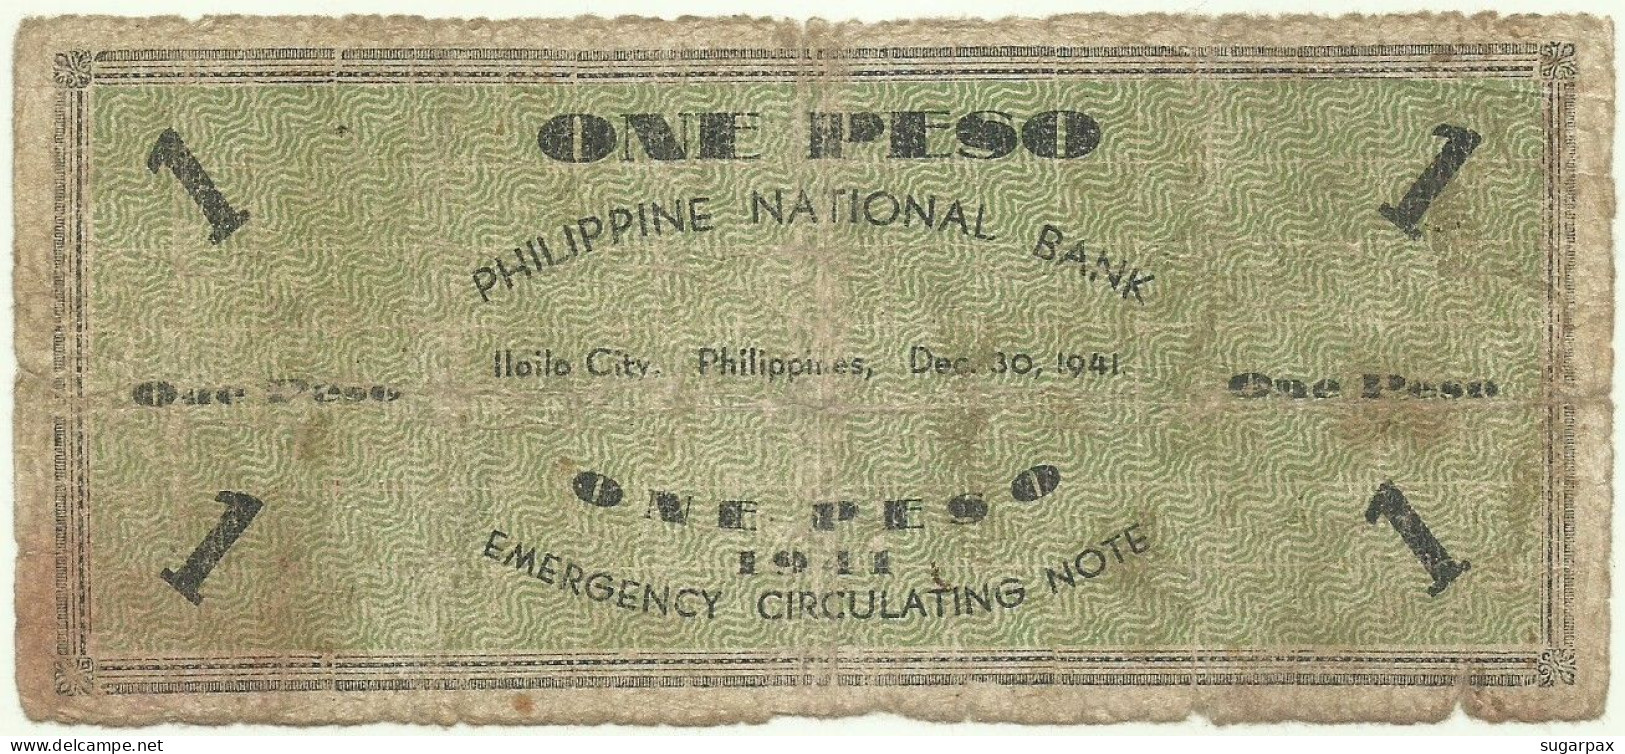 PHILIPPINES - 1 Peso - 1941 - Pick S 305 - Serie A6 - ILOILO Currency Committee - Philippines